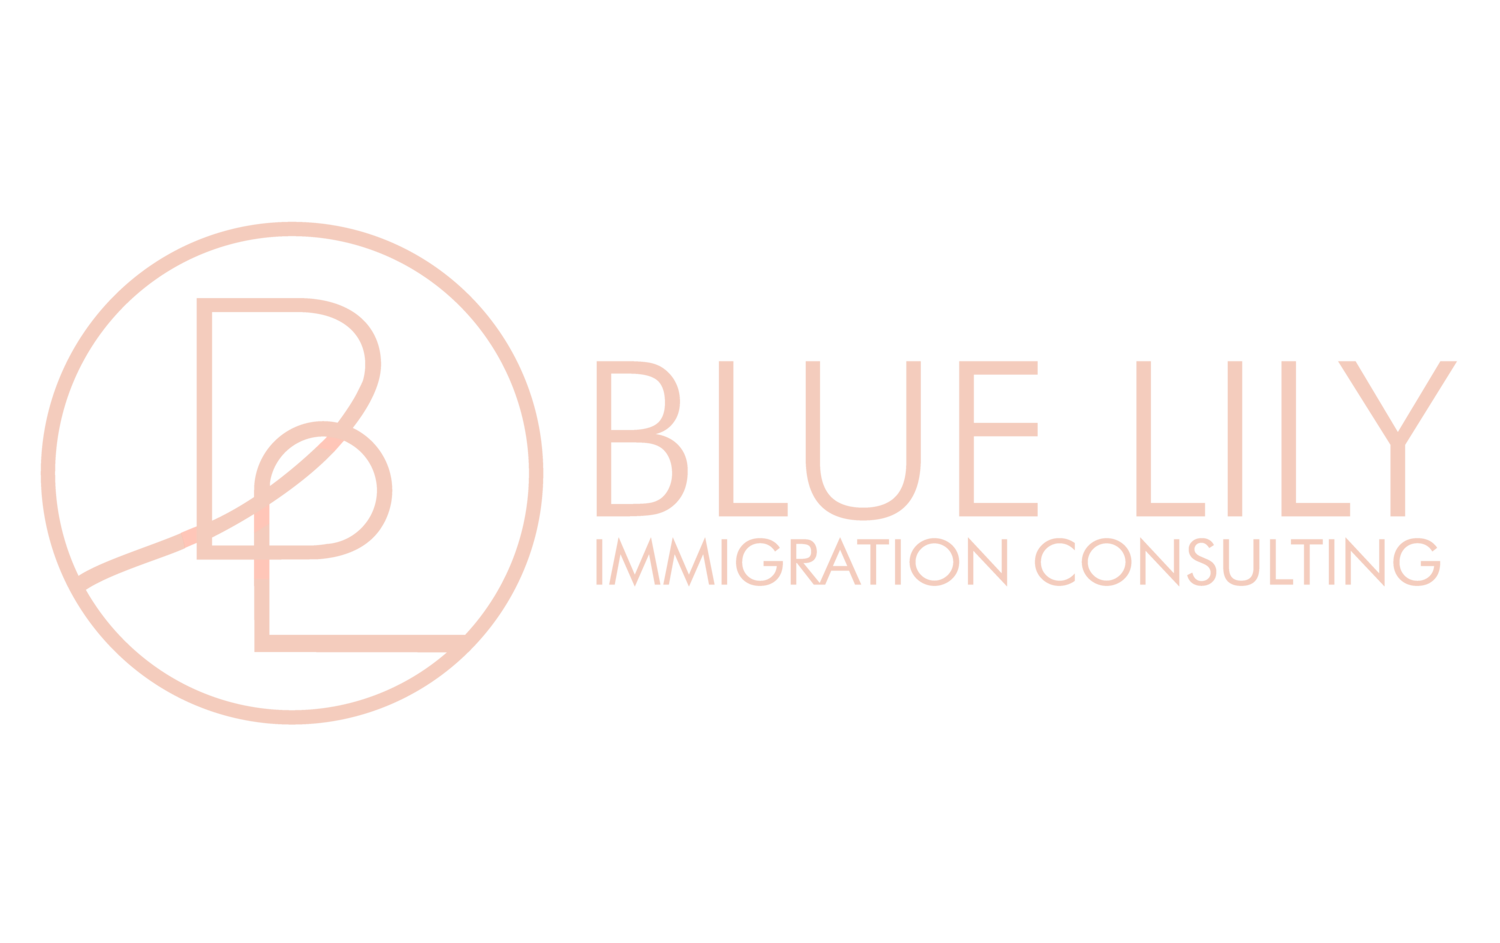 Blue Lily Immigration Consulting